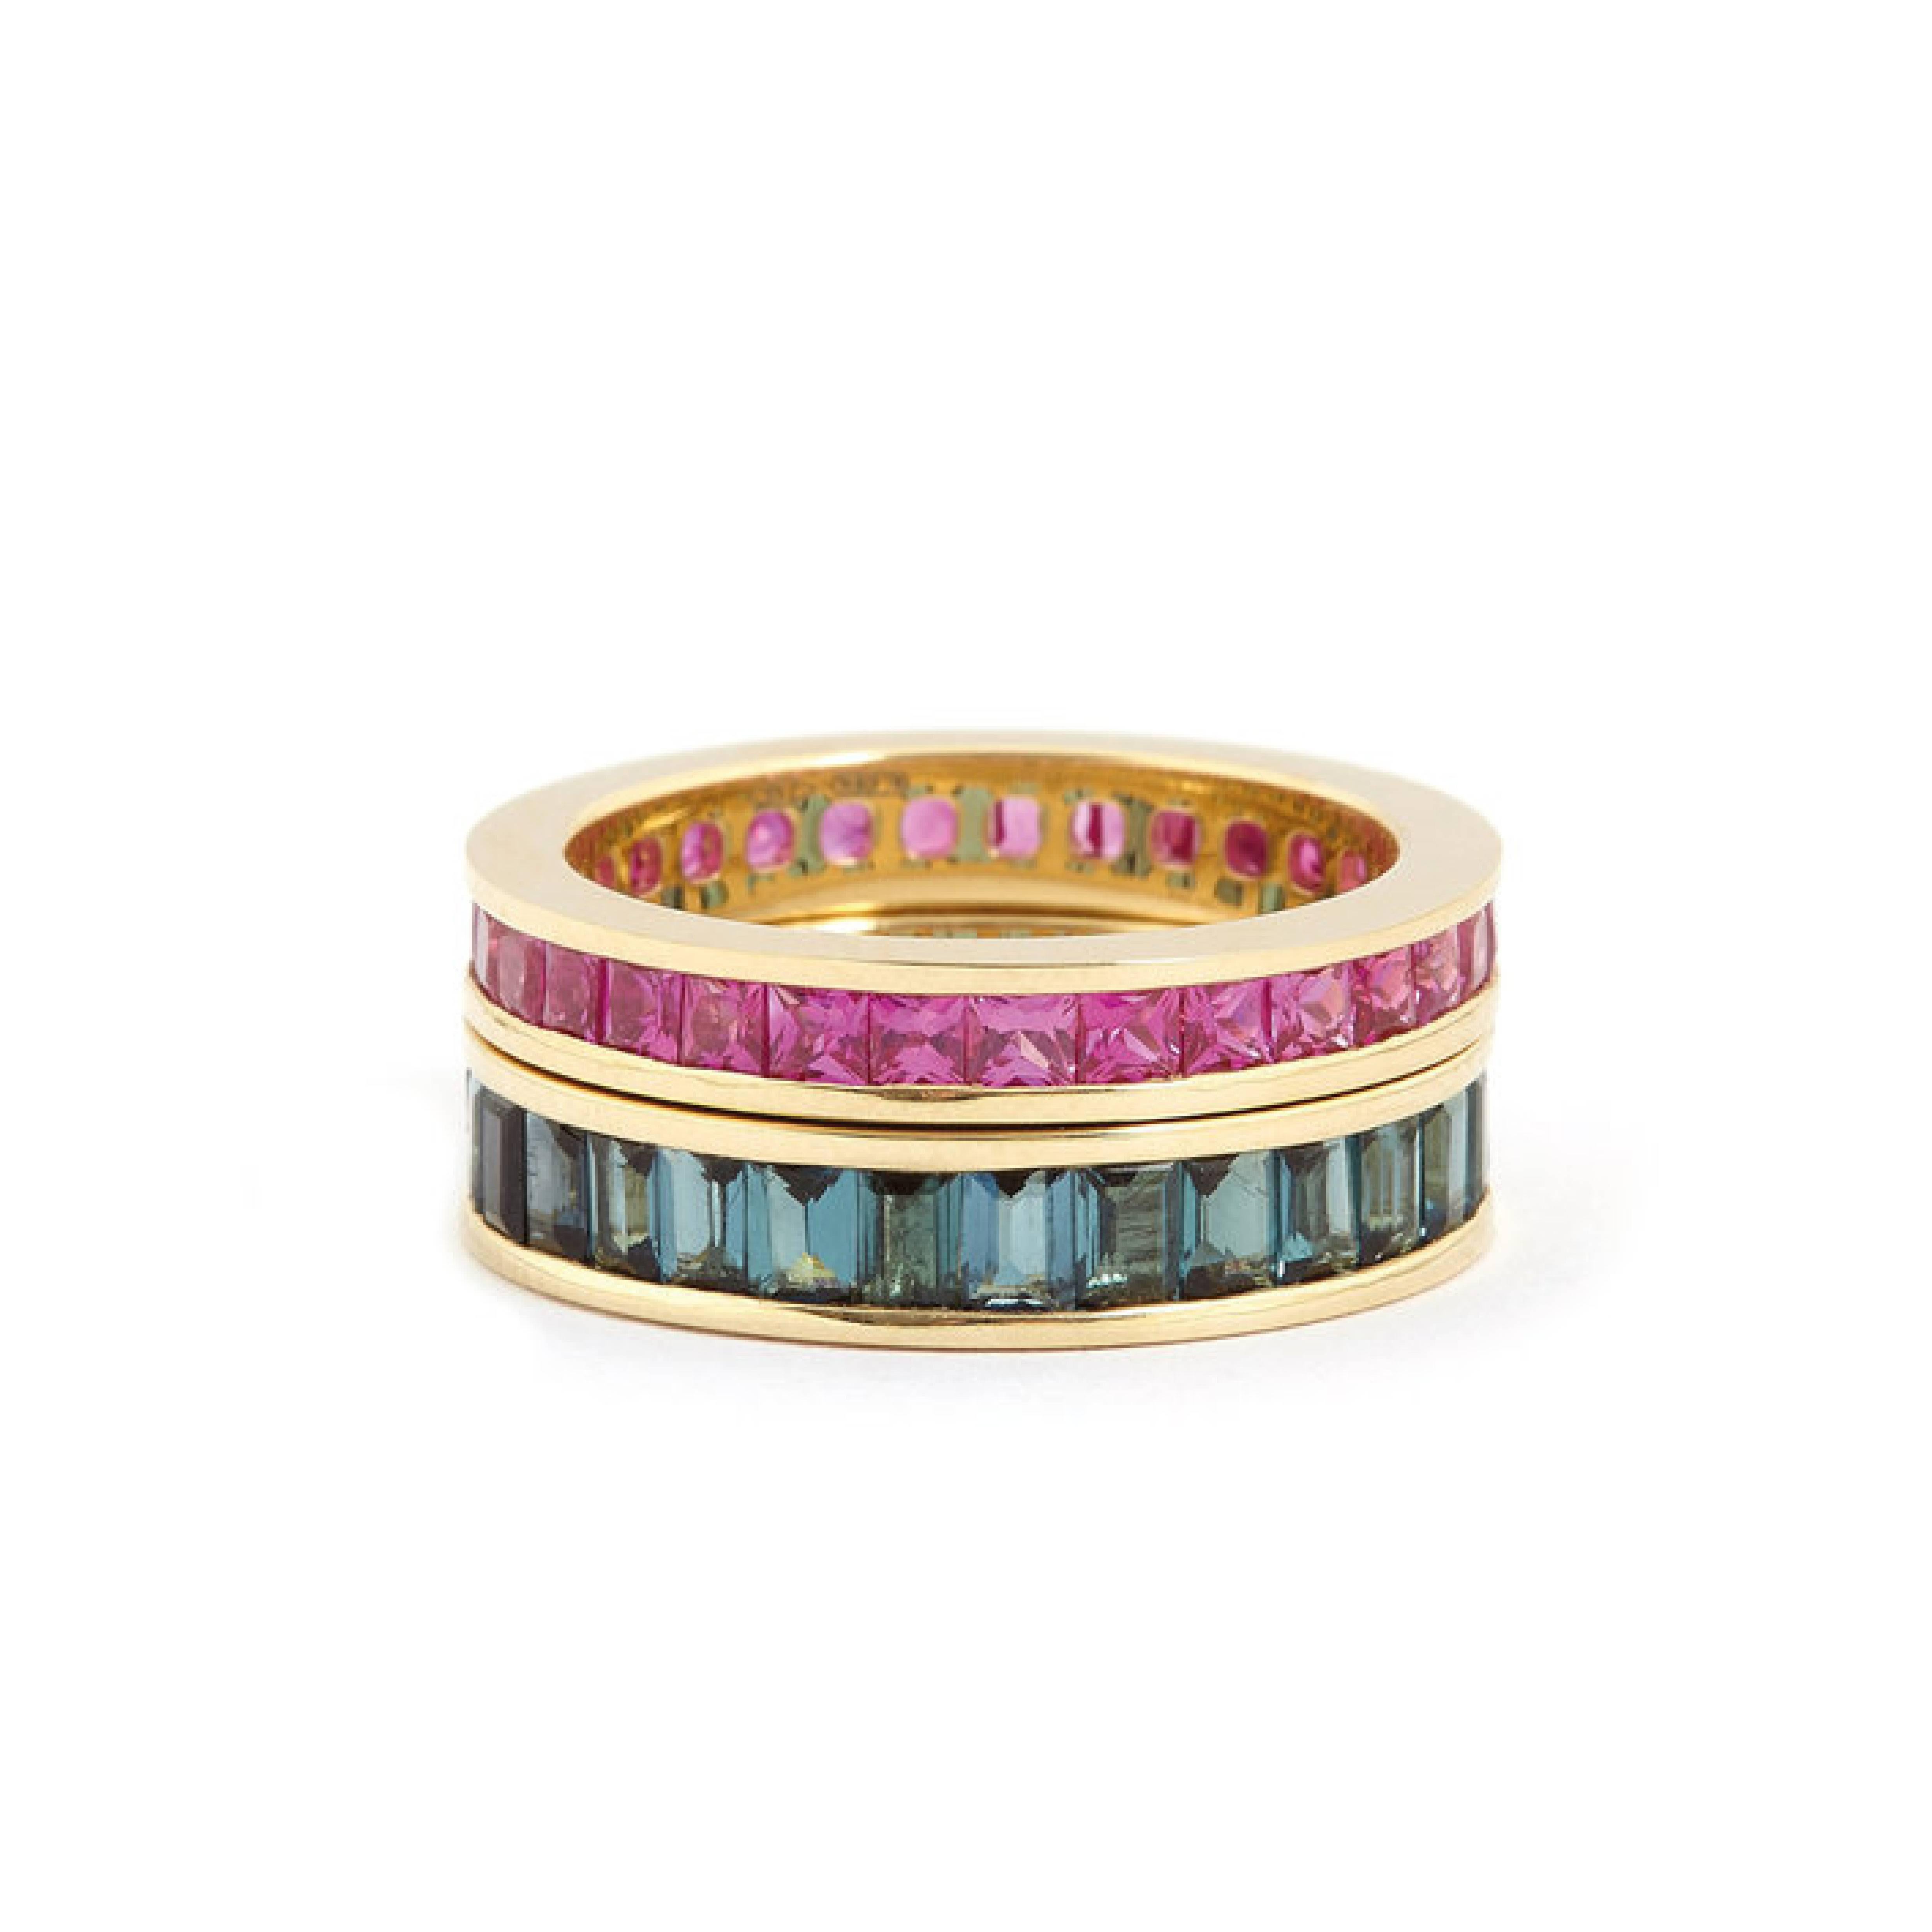 Eternity ring invisibly set pink princess-cut rubies in 18k yellow gold. Crafted in Italy by master craftsmen 

Fouché bespoke band rings are created according to your band size; available in US band size 4 to 7. Please contact us if you require a